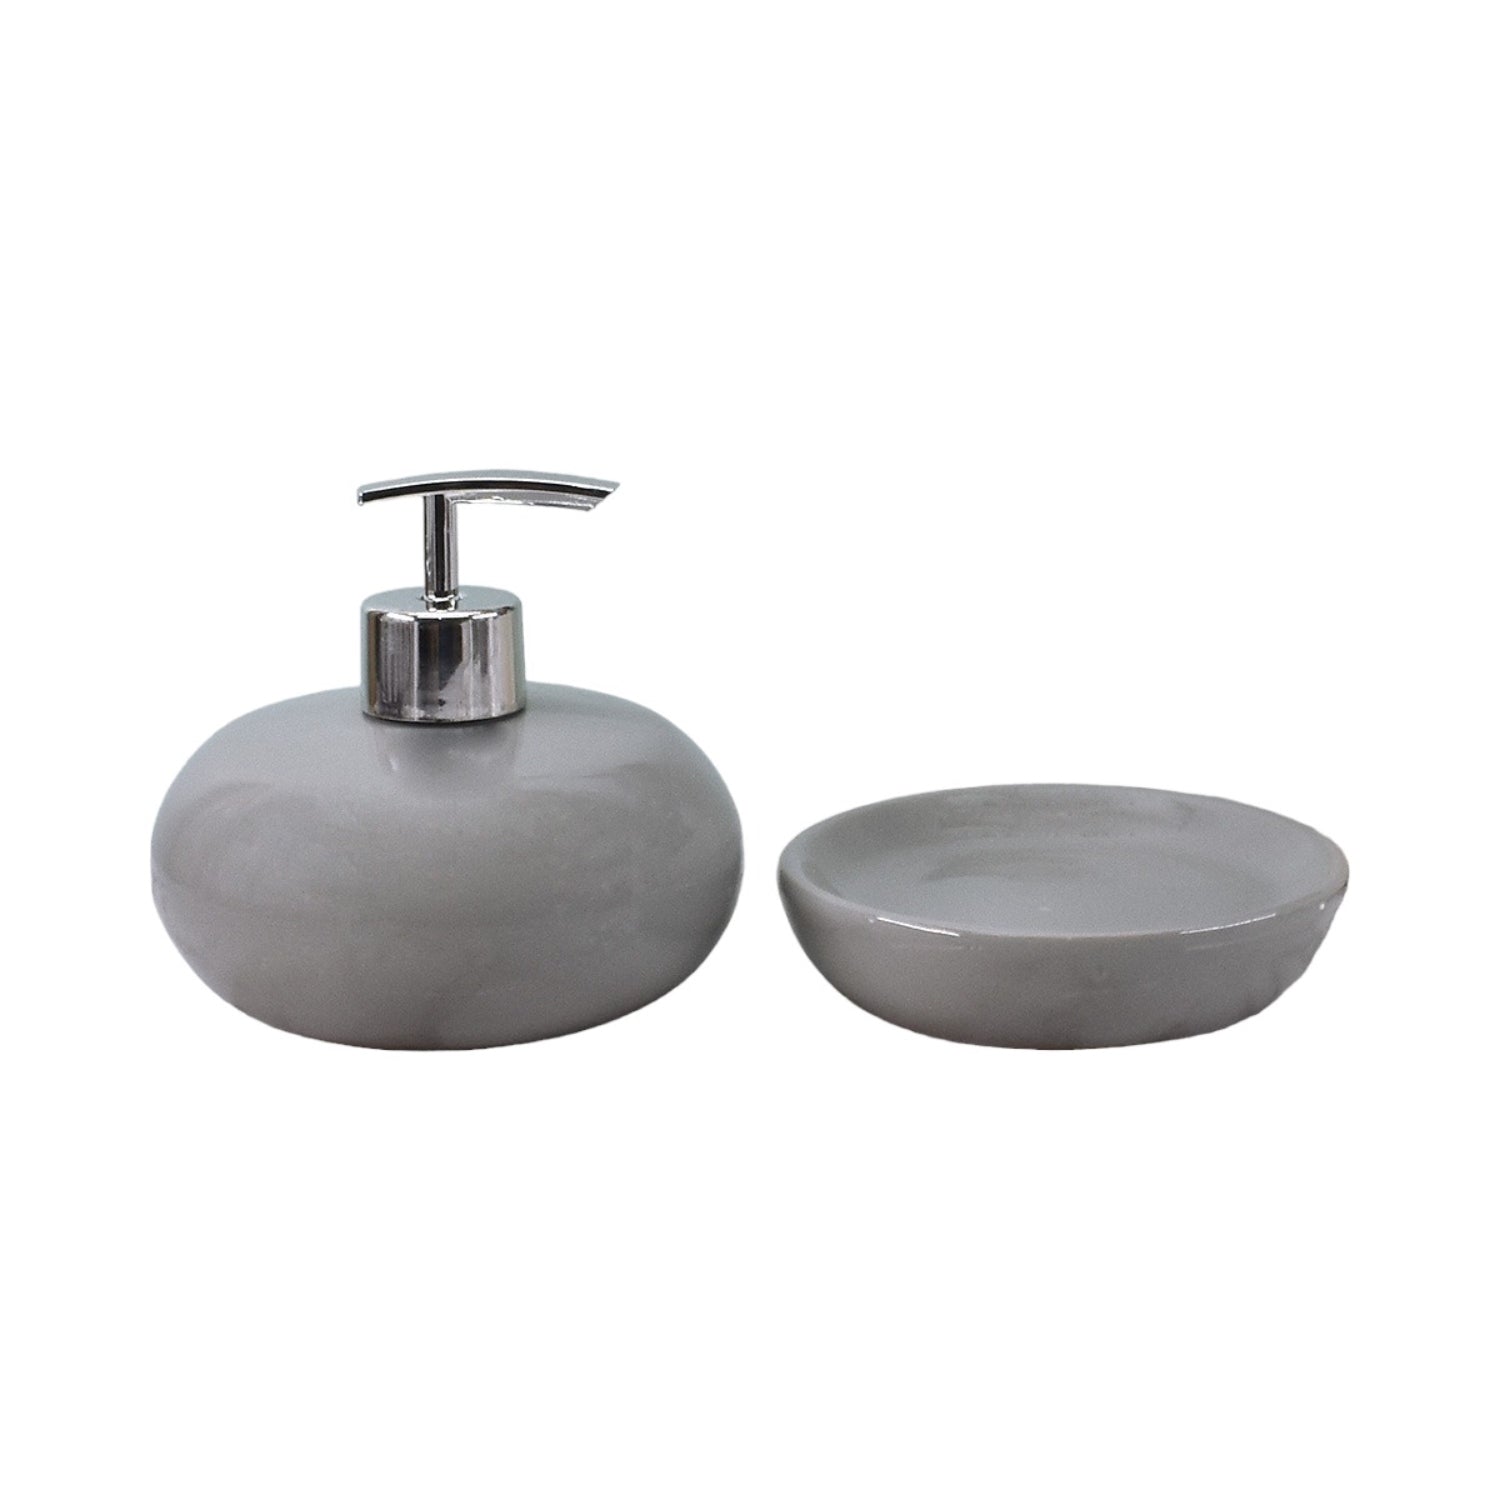 Ceramic Soap Dispenser Set with Soap Dish, Set of 2 Bathroom Accessories for Home (C2028)